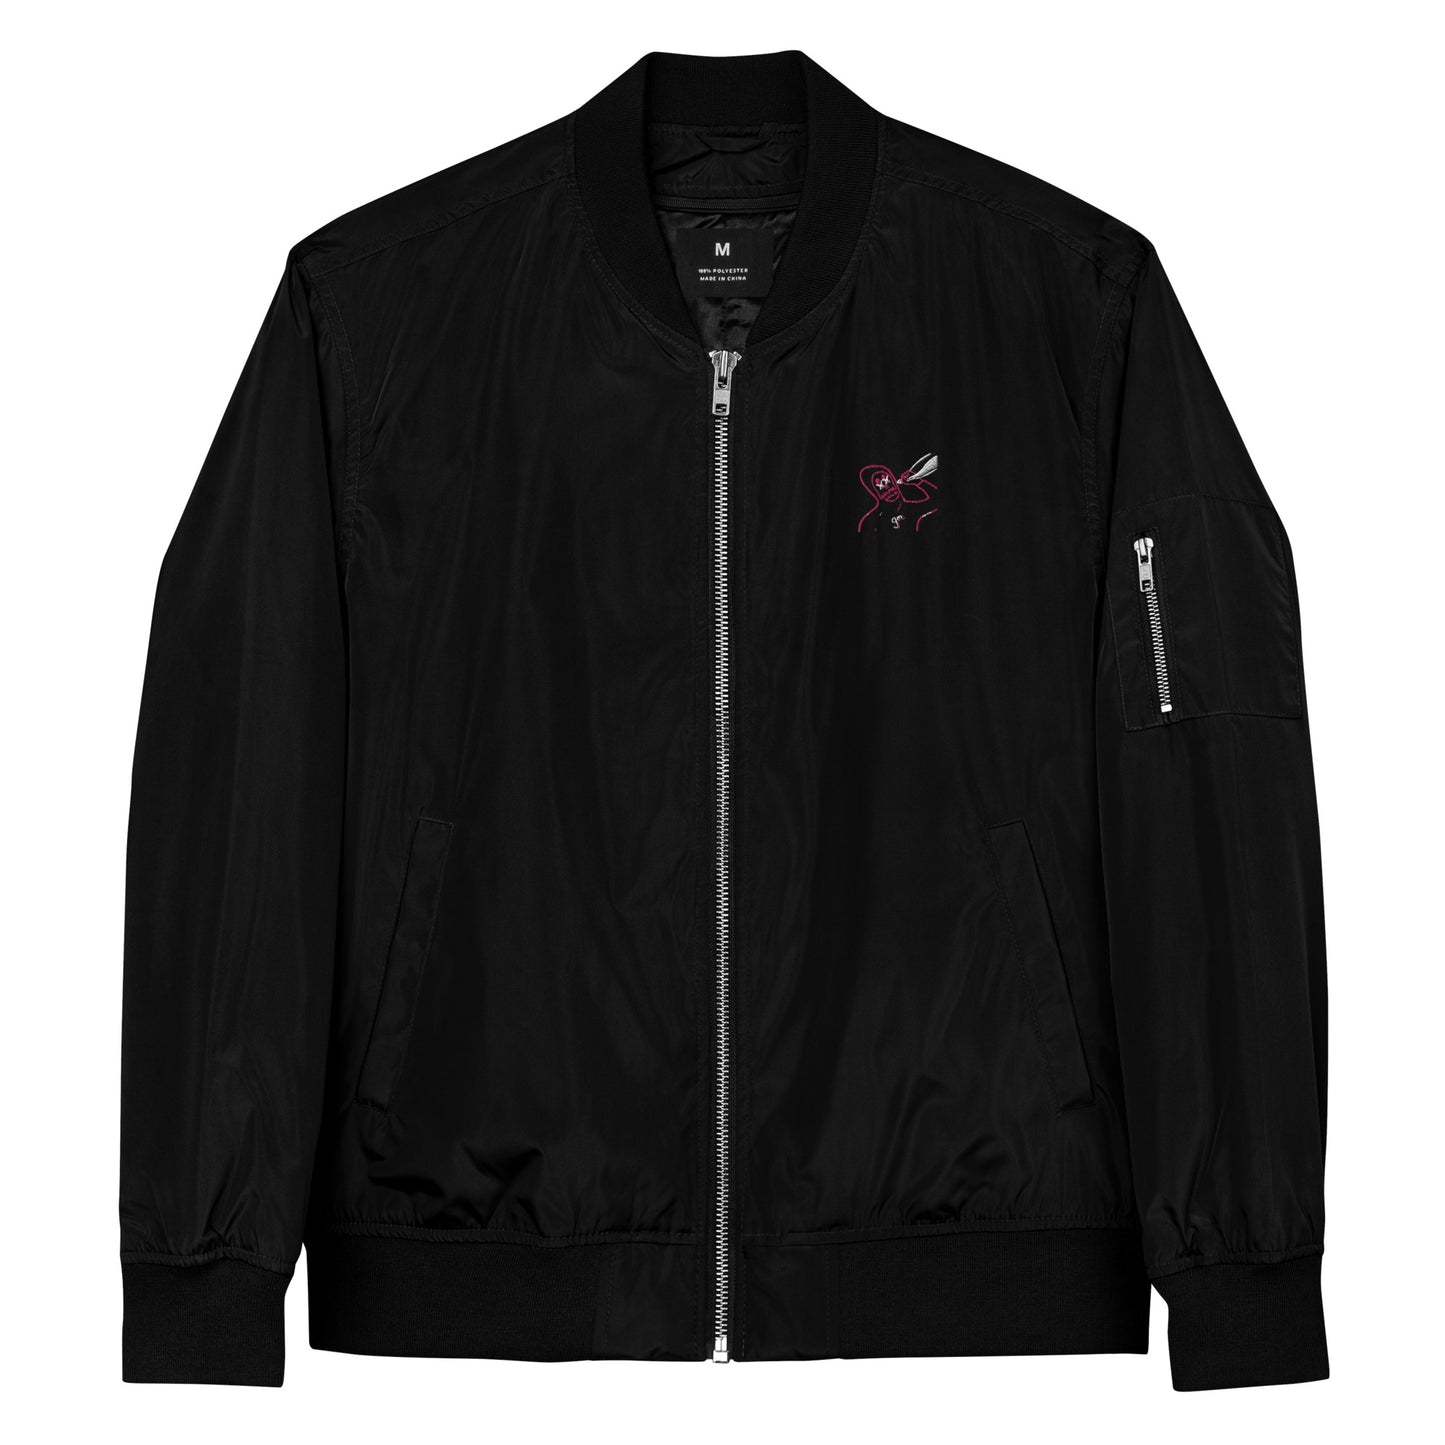 Premium recycled bomber jacket feat rektguy #889 (embroidered)